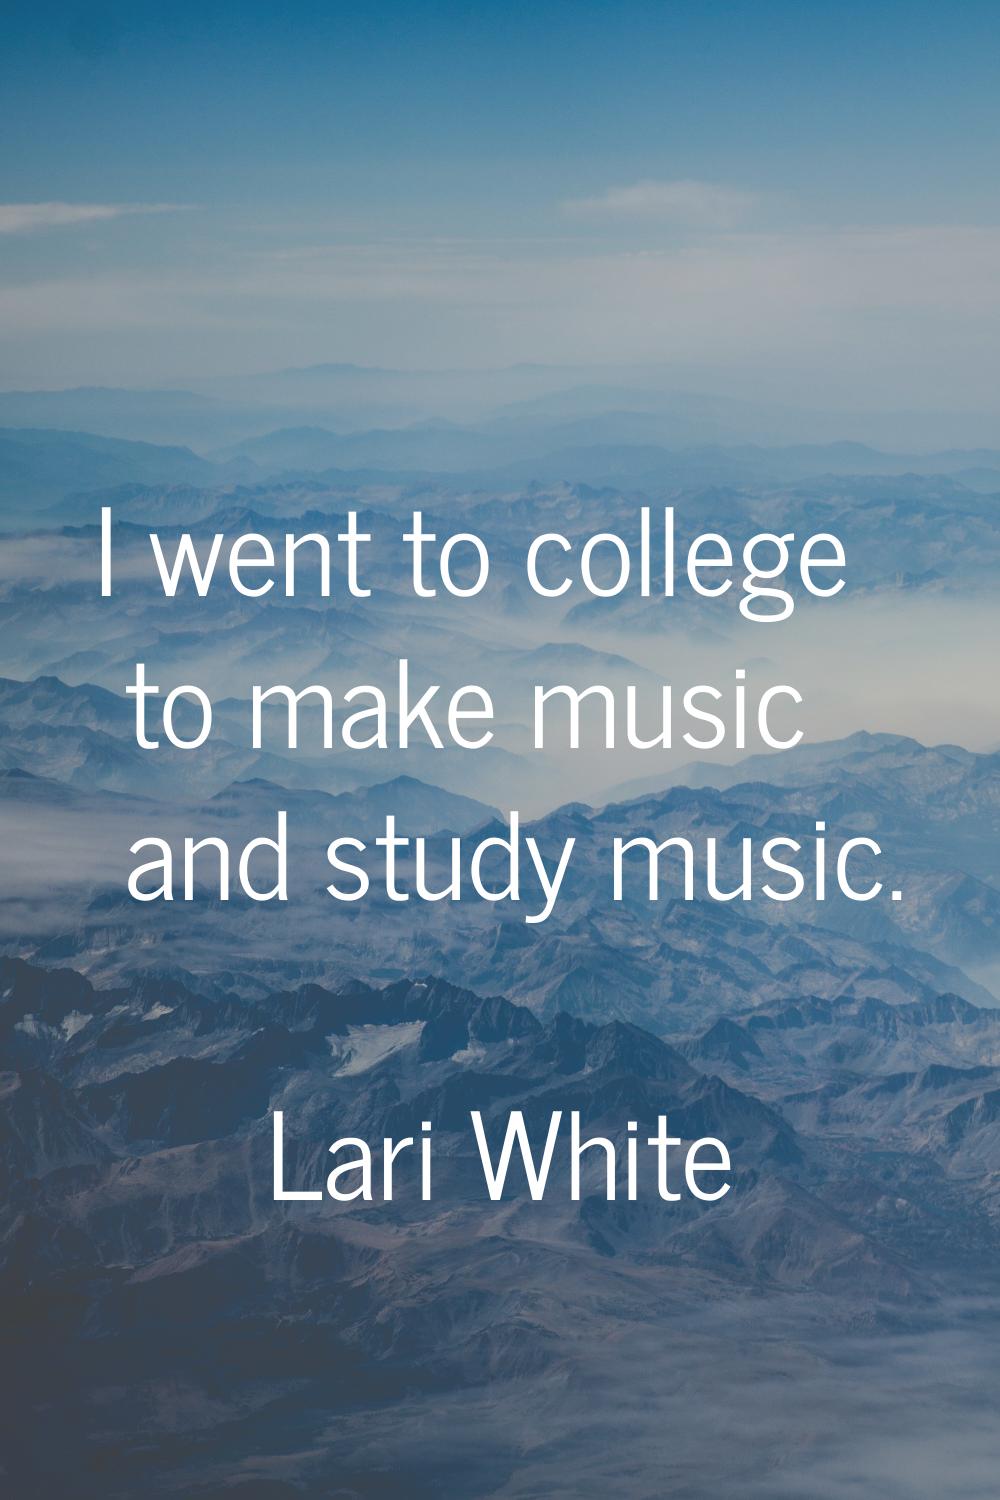 I went to college to make music and study music.